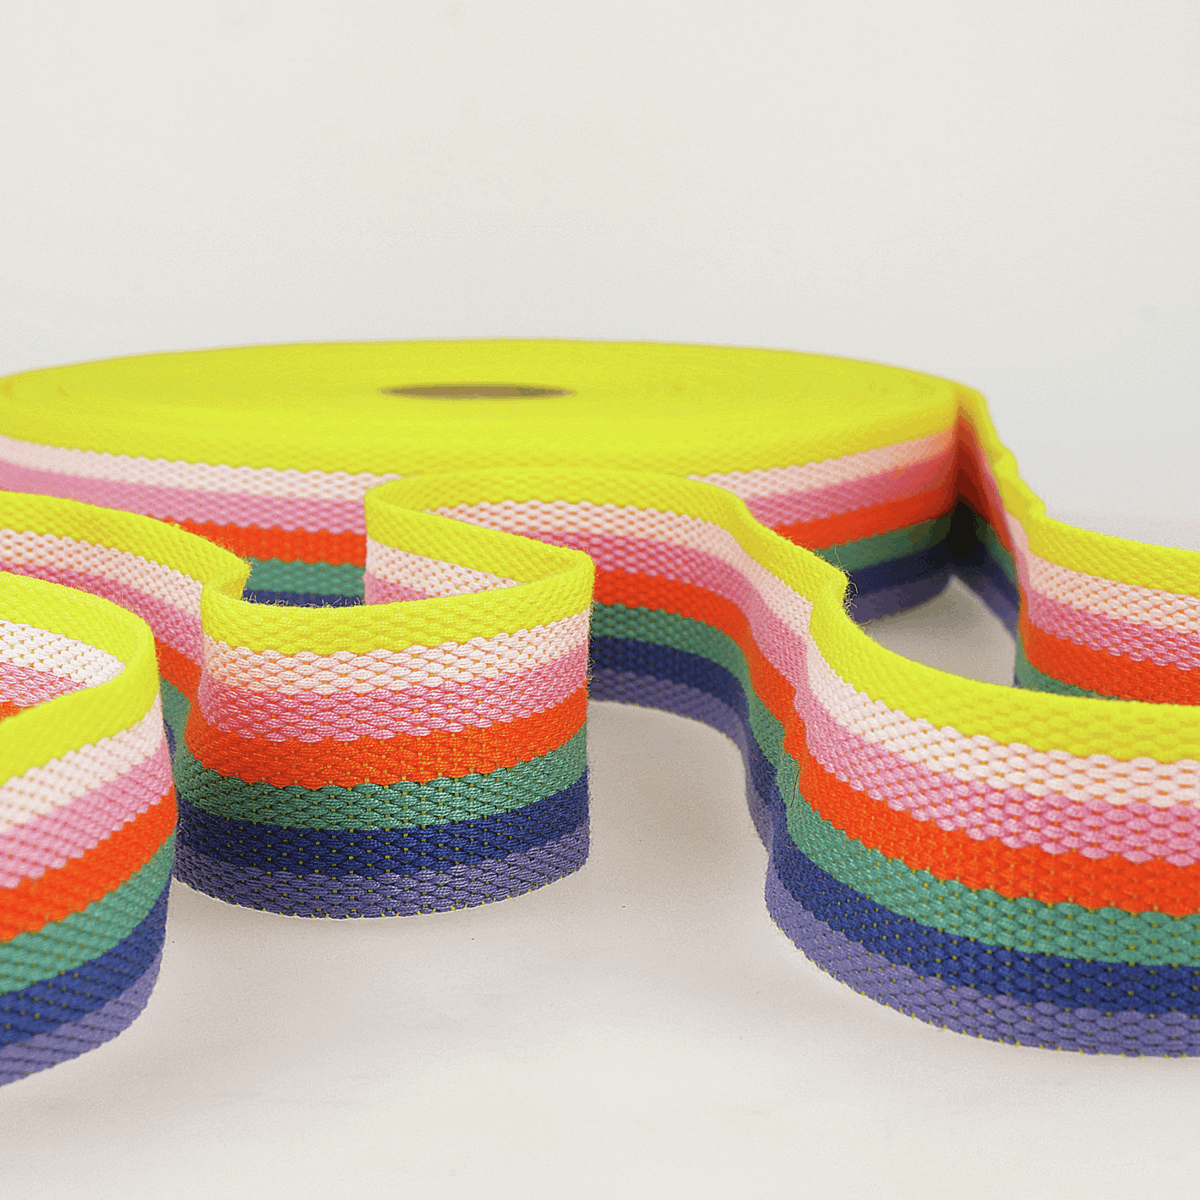 Striped Rainbow Webbing, belt, bag strapping 40 mm. Heavyweight. By the Metre.